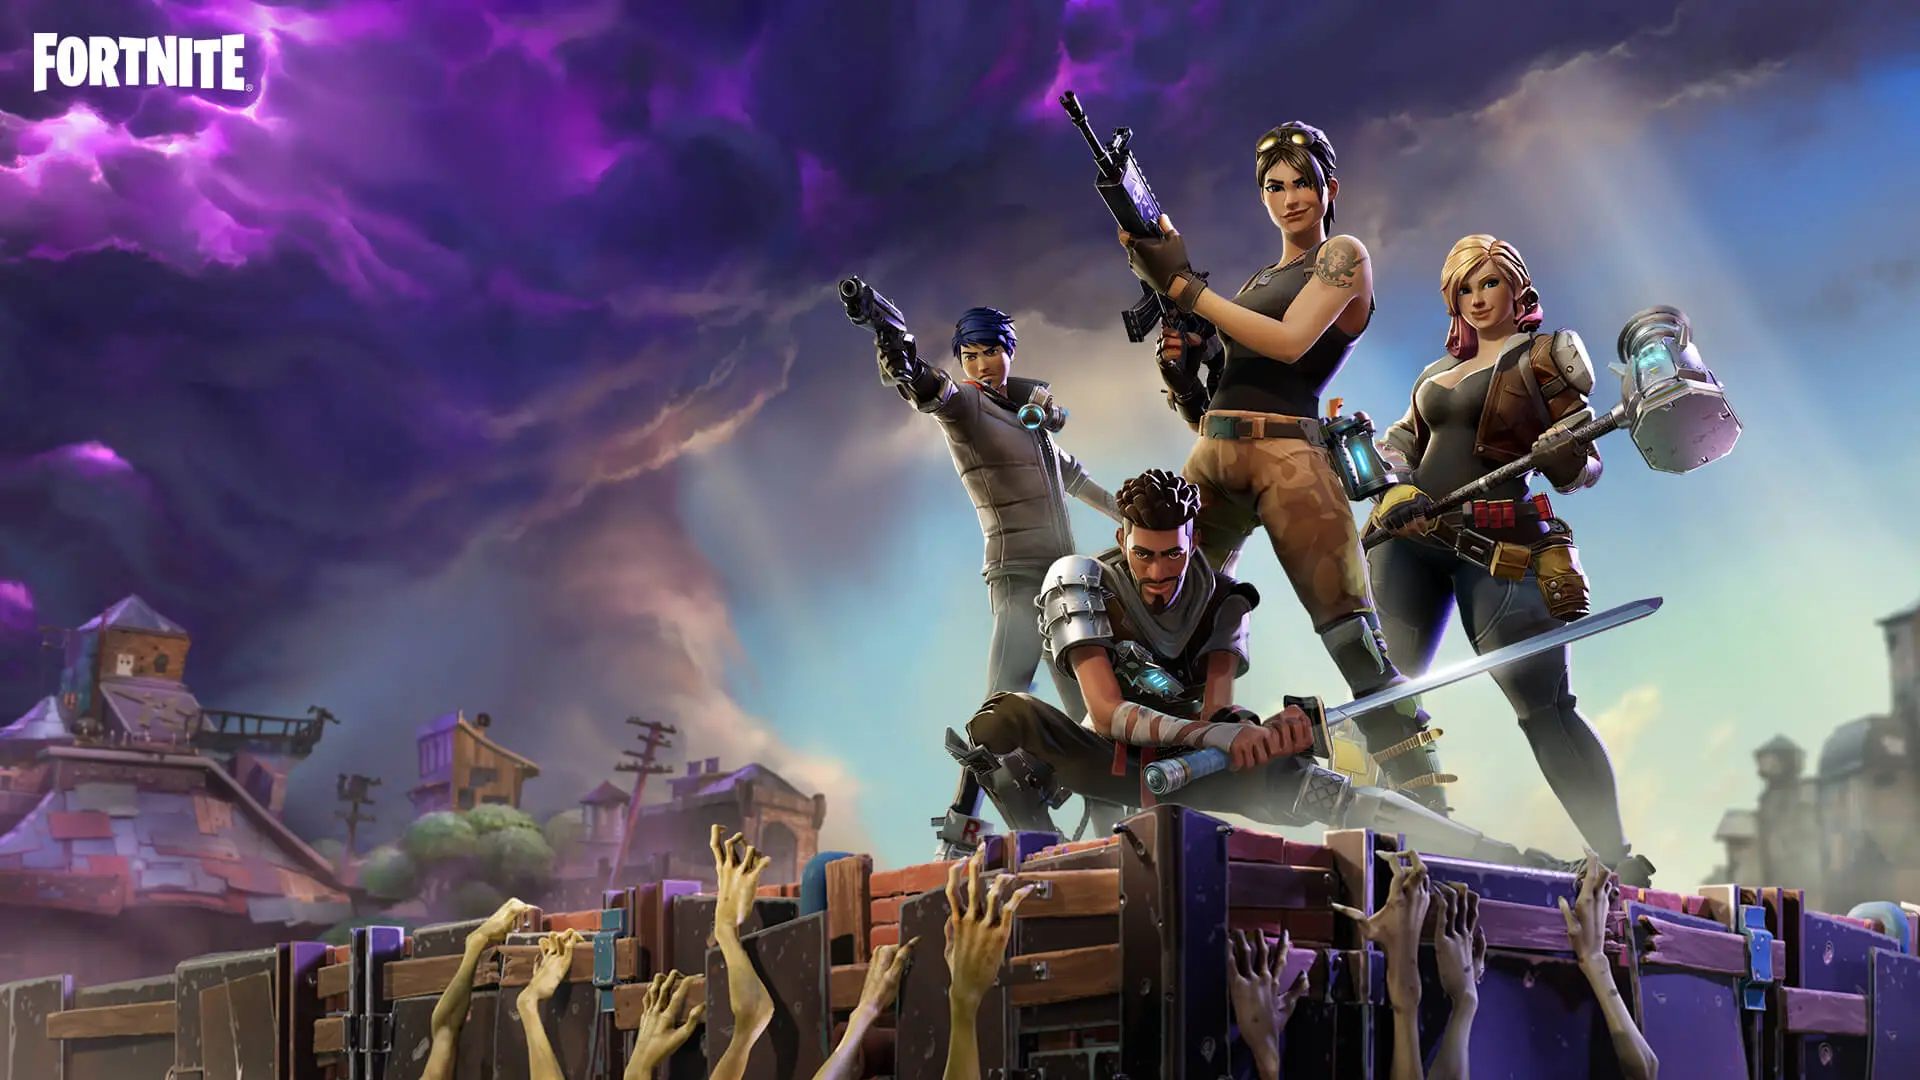 Save 50% on Fortnite Save the World - wide 3